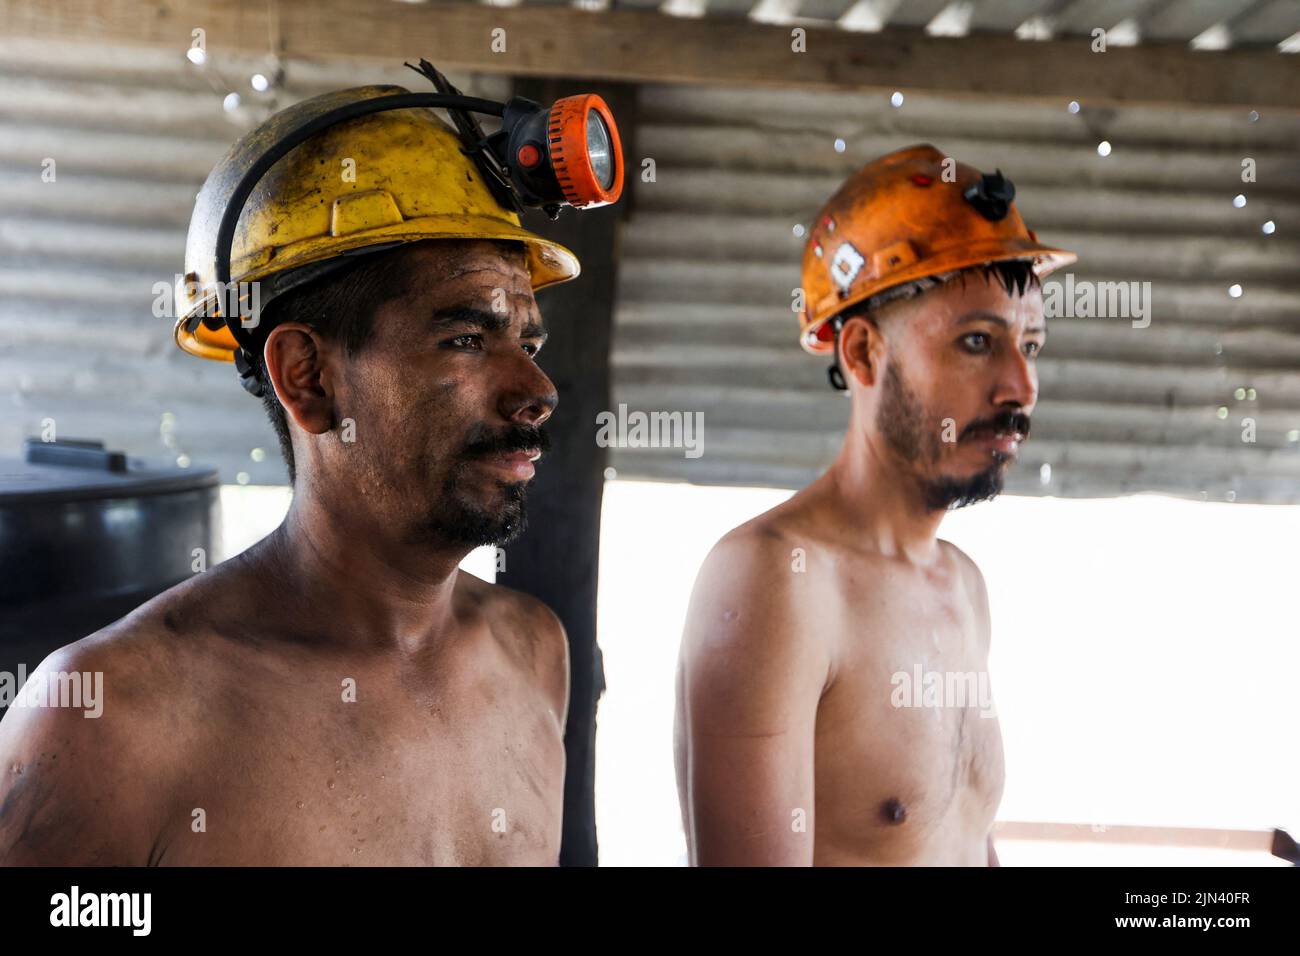 Miners work at an artisanal coal mine, or 'pocito' (little hole), known for their rudimentary and often dangerous mining techniques, in Sabinas, Coahuila state, Mexico, August 8, 2022. REUTERS/Luis Cortes Stock Photo